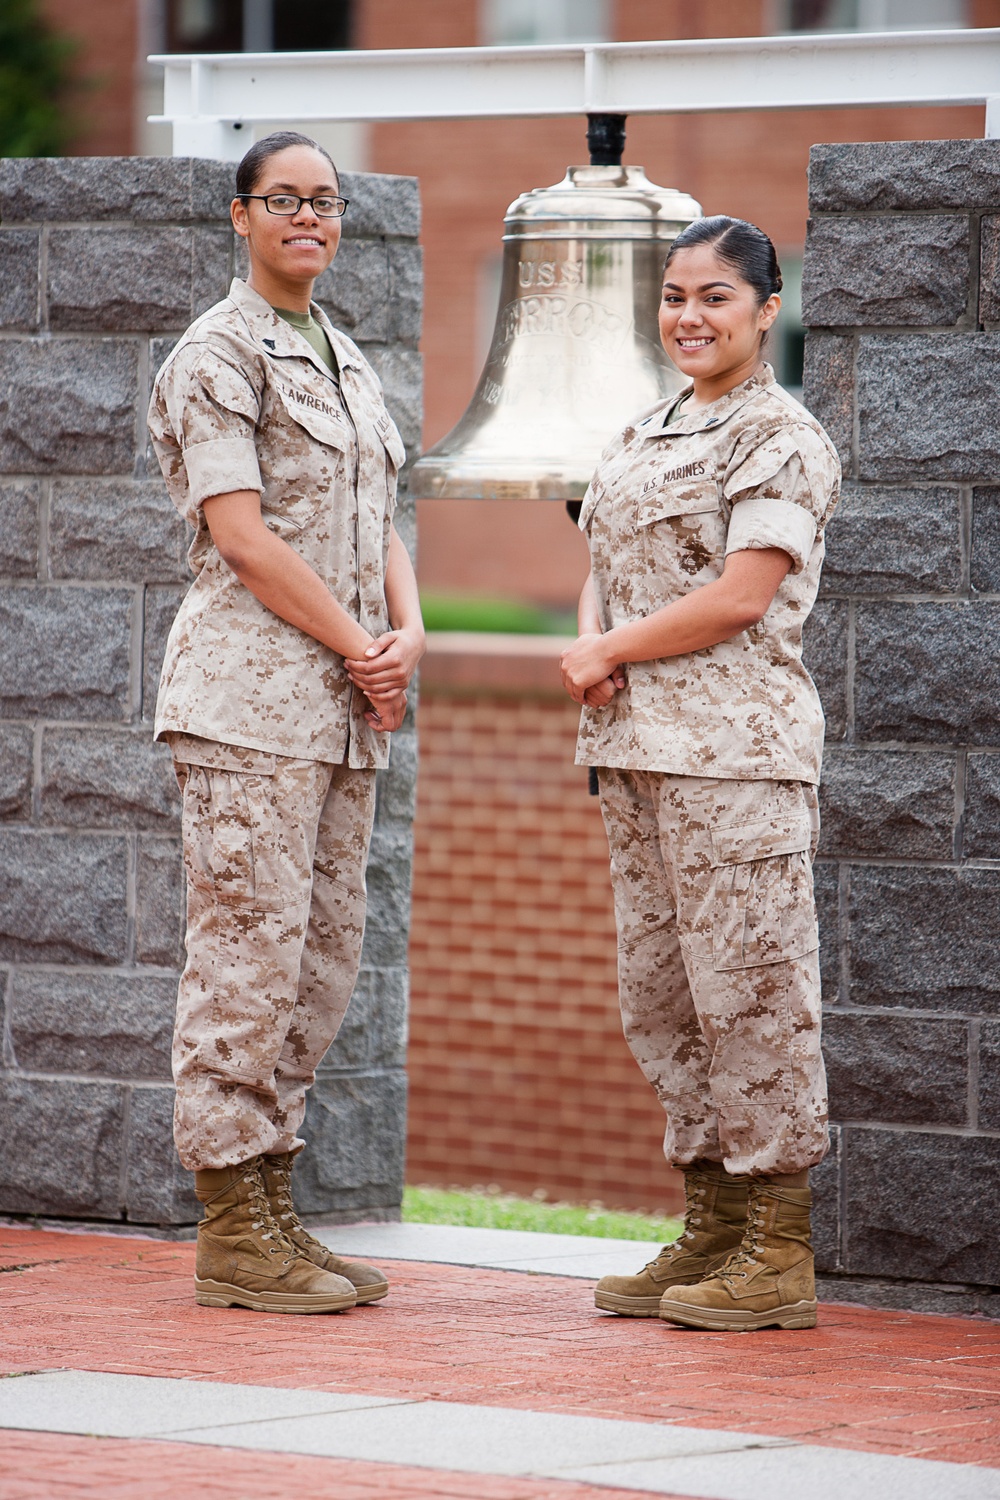 Local Marines promoted meritoriously, recognized by Corps’ top leader